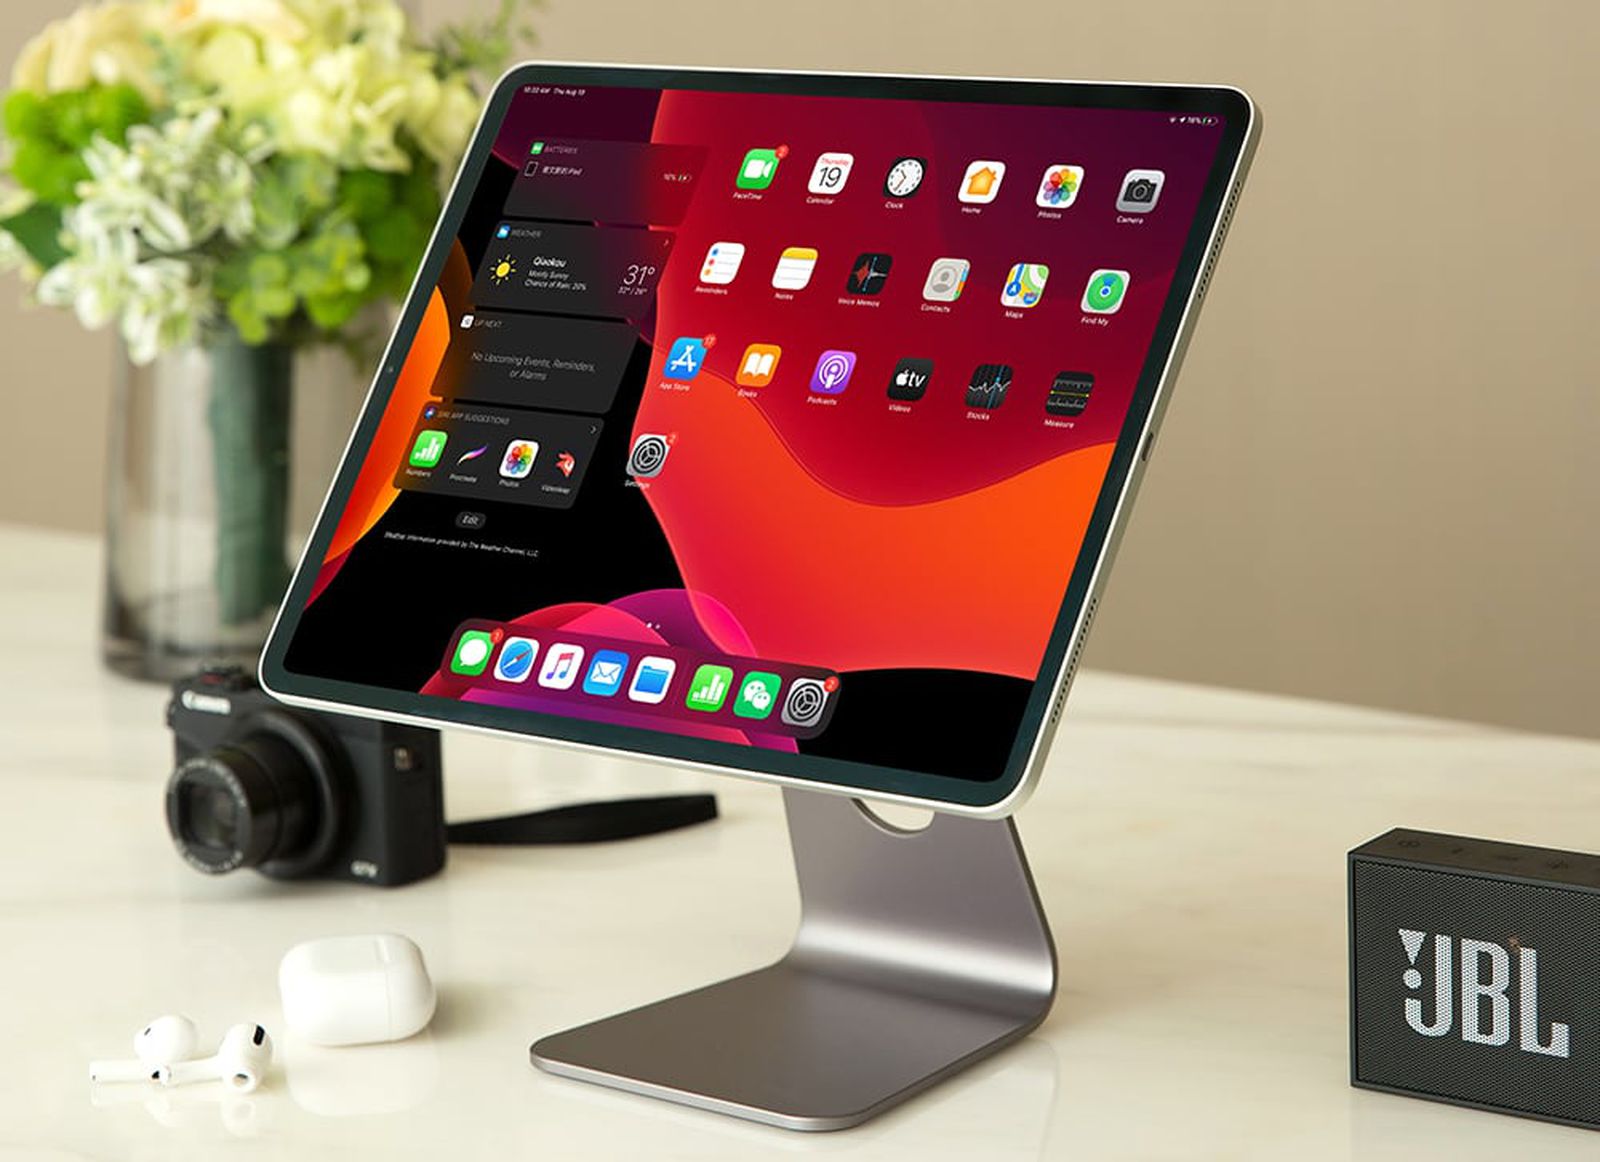 MacRumors Giveaway: Win a Magnetic iPad Stand From Lululook